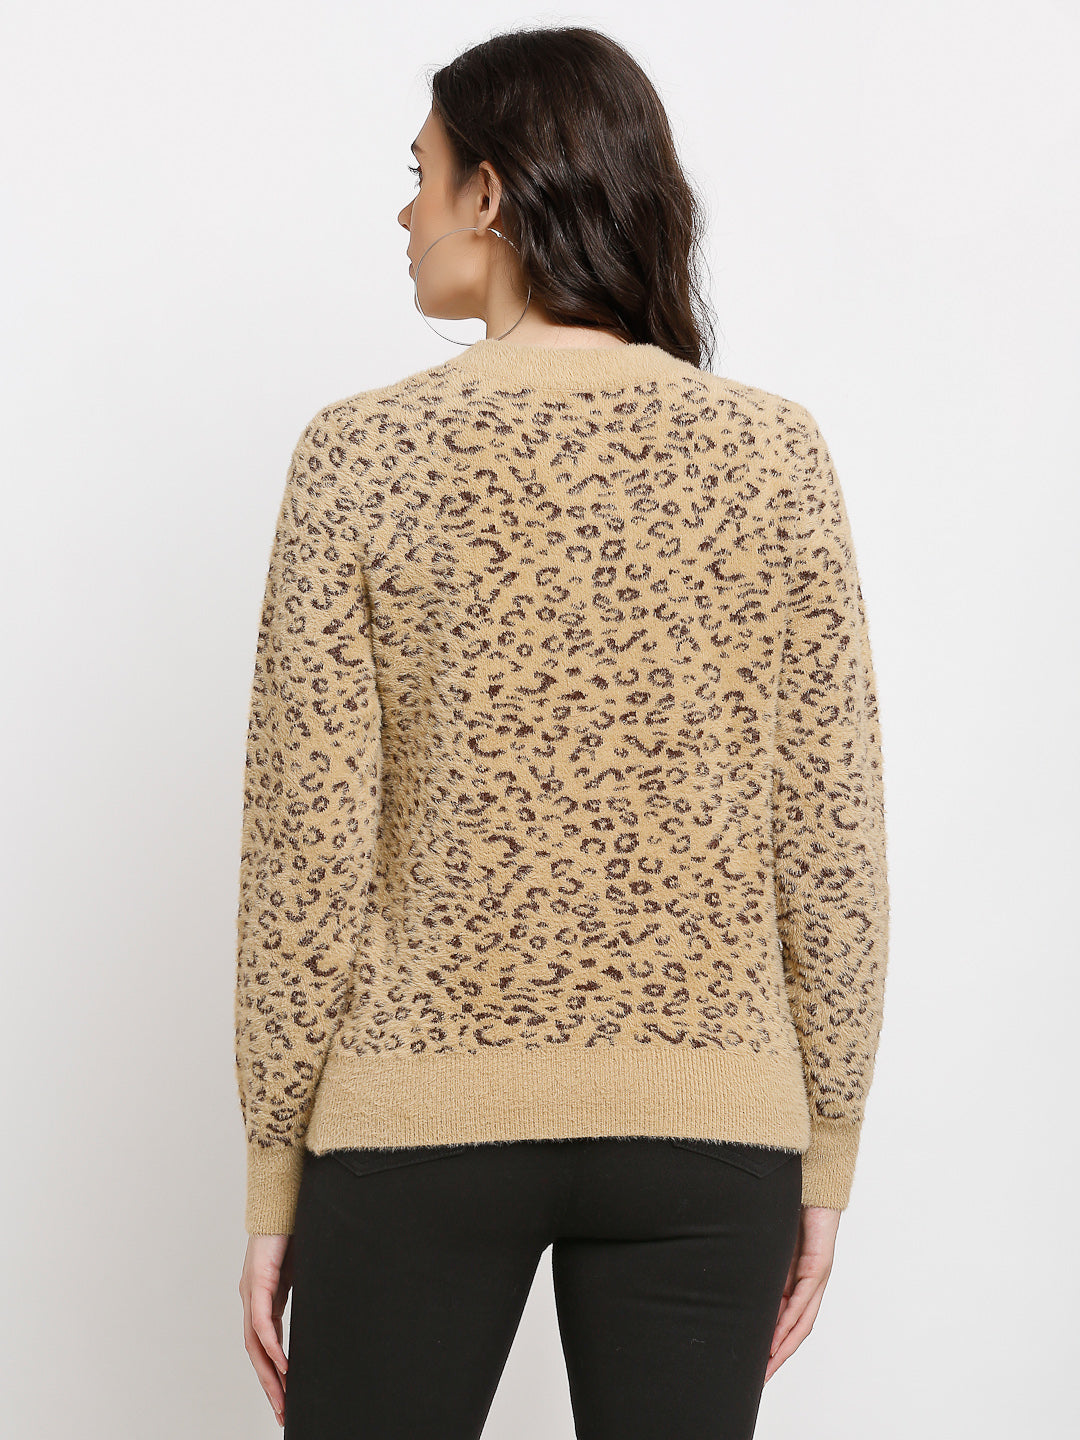  Knitted Printed Round Neck Pullover